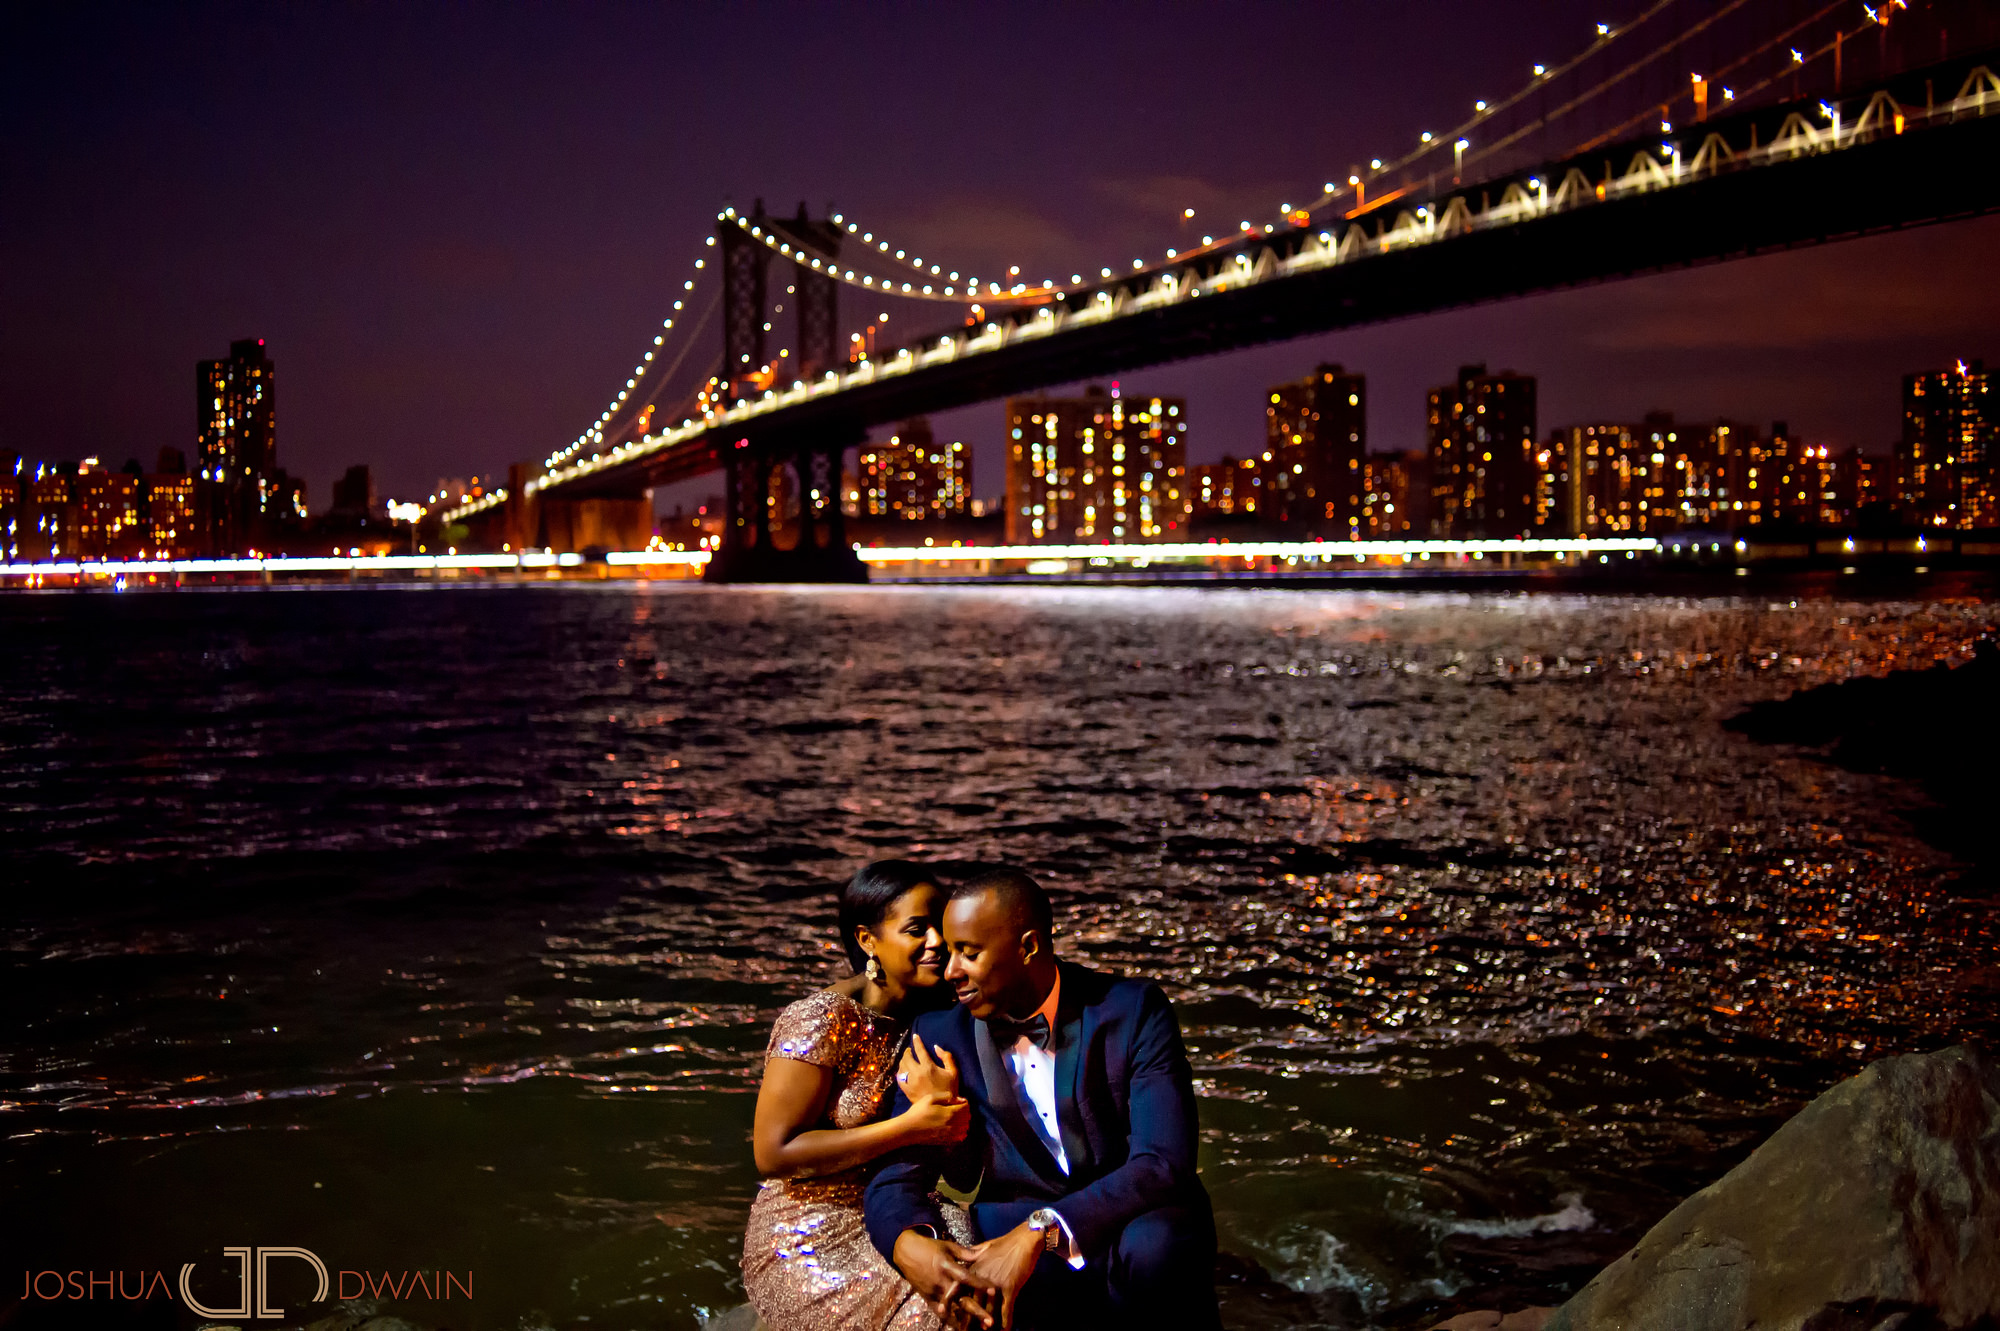 Penelope & Joseph's Engagement Session in Dumbo, Brooklyn, NYC